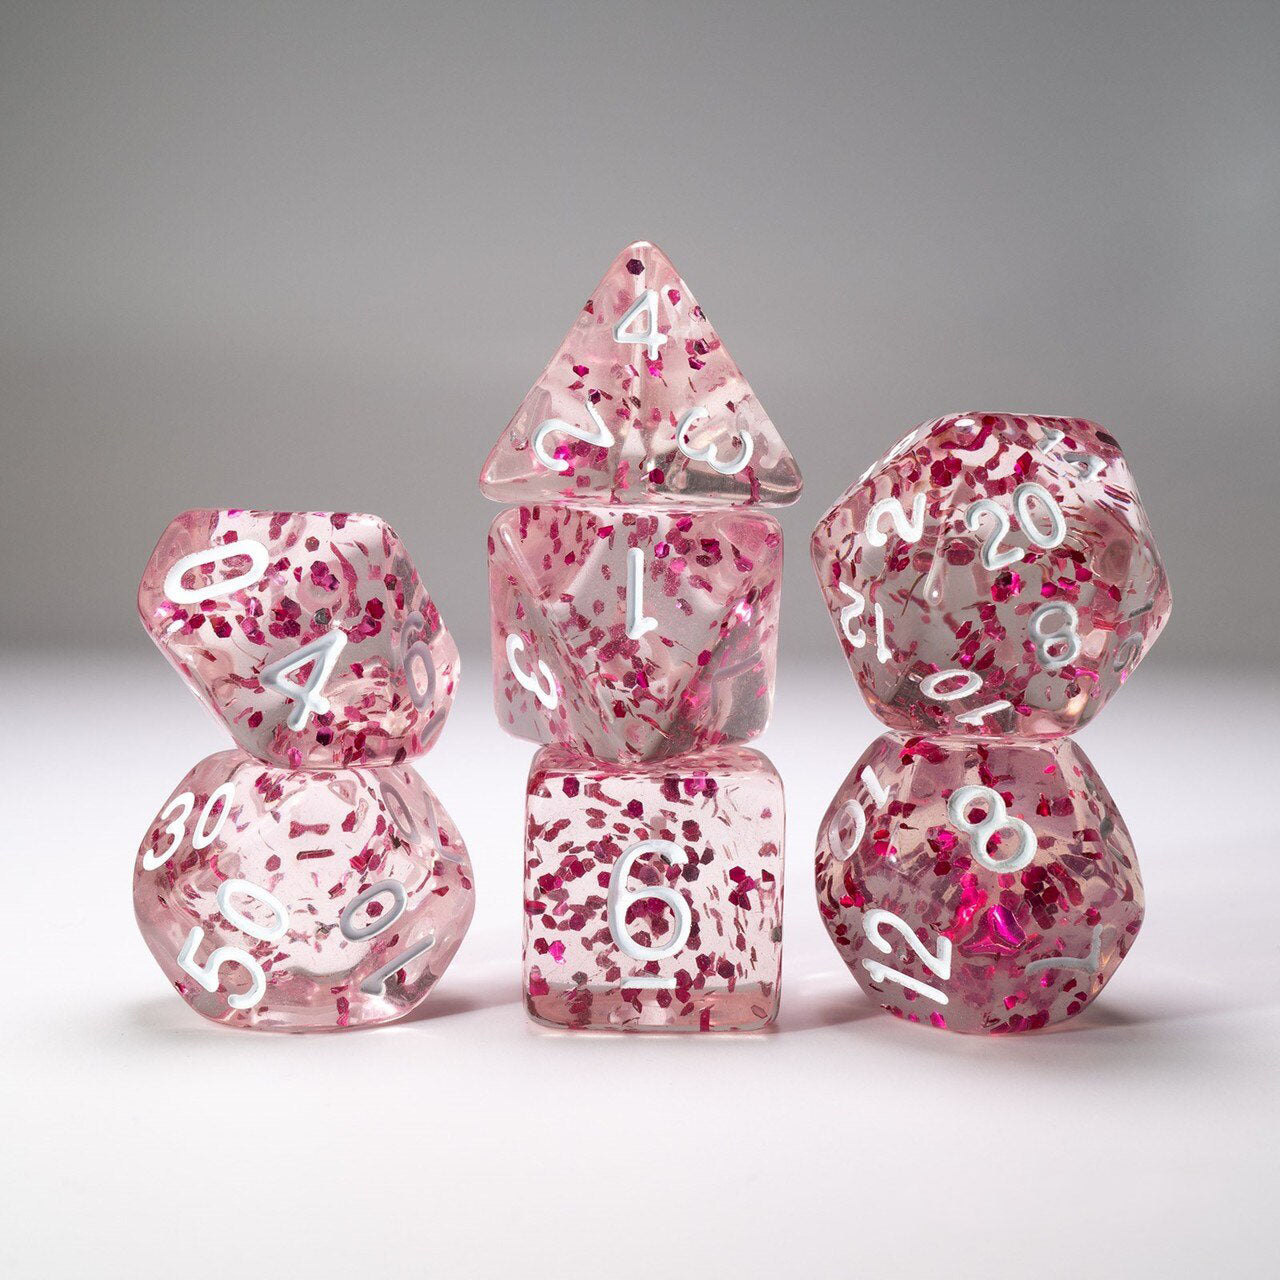 D20 Polyhedral 7 Piece Dice Set - Glitter - Large Flake -Pink